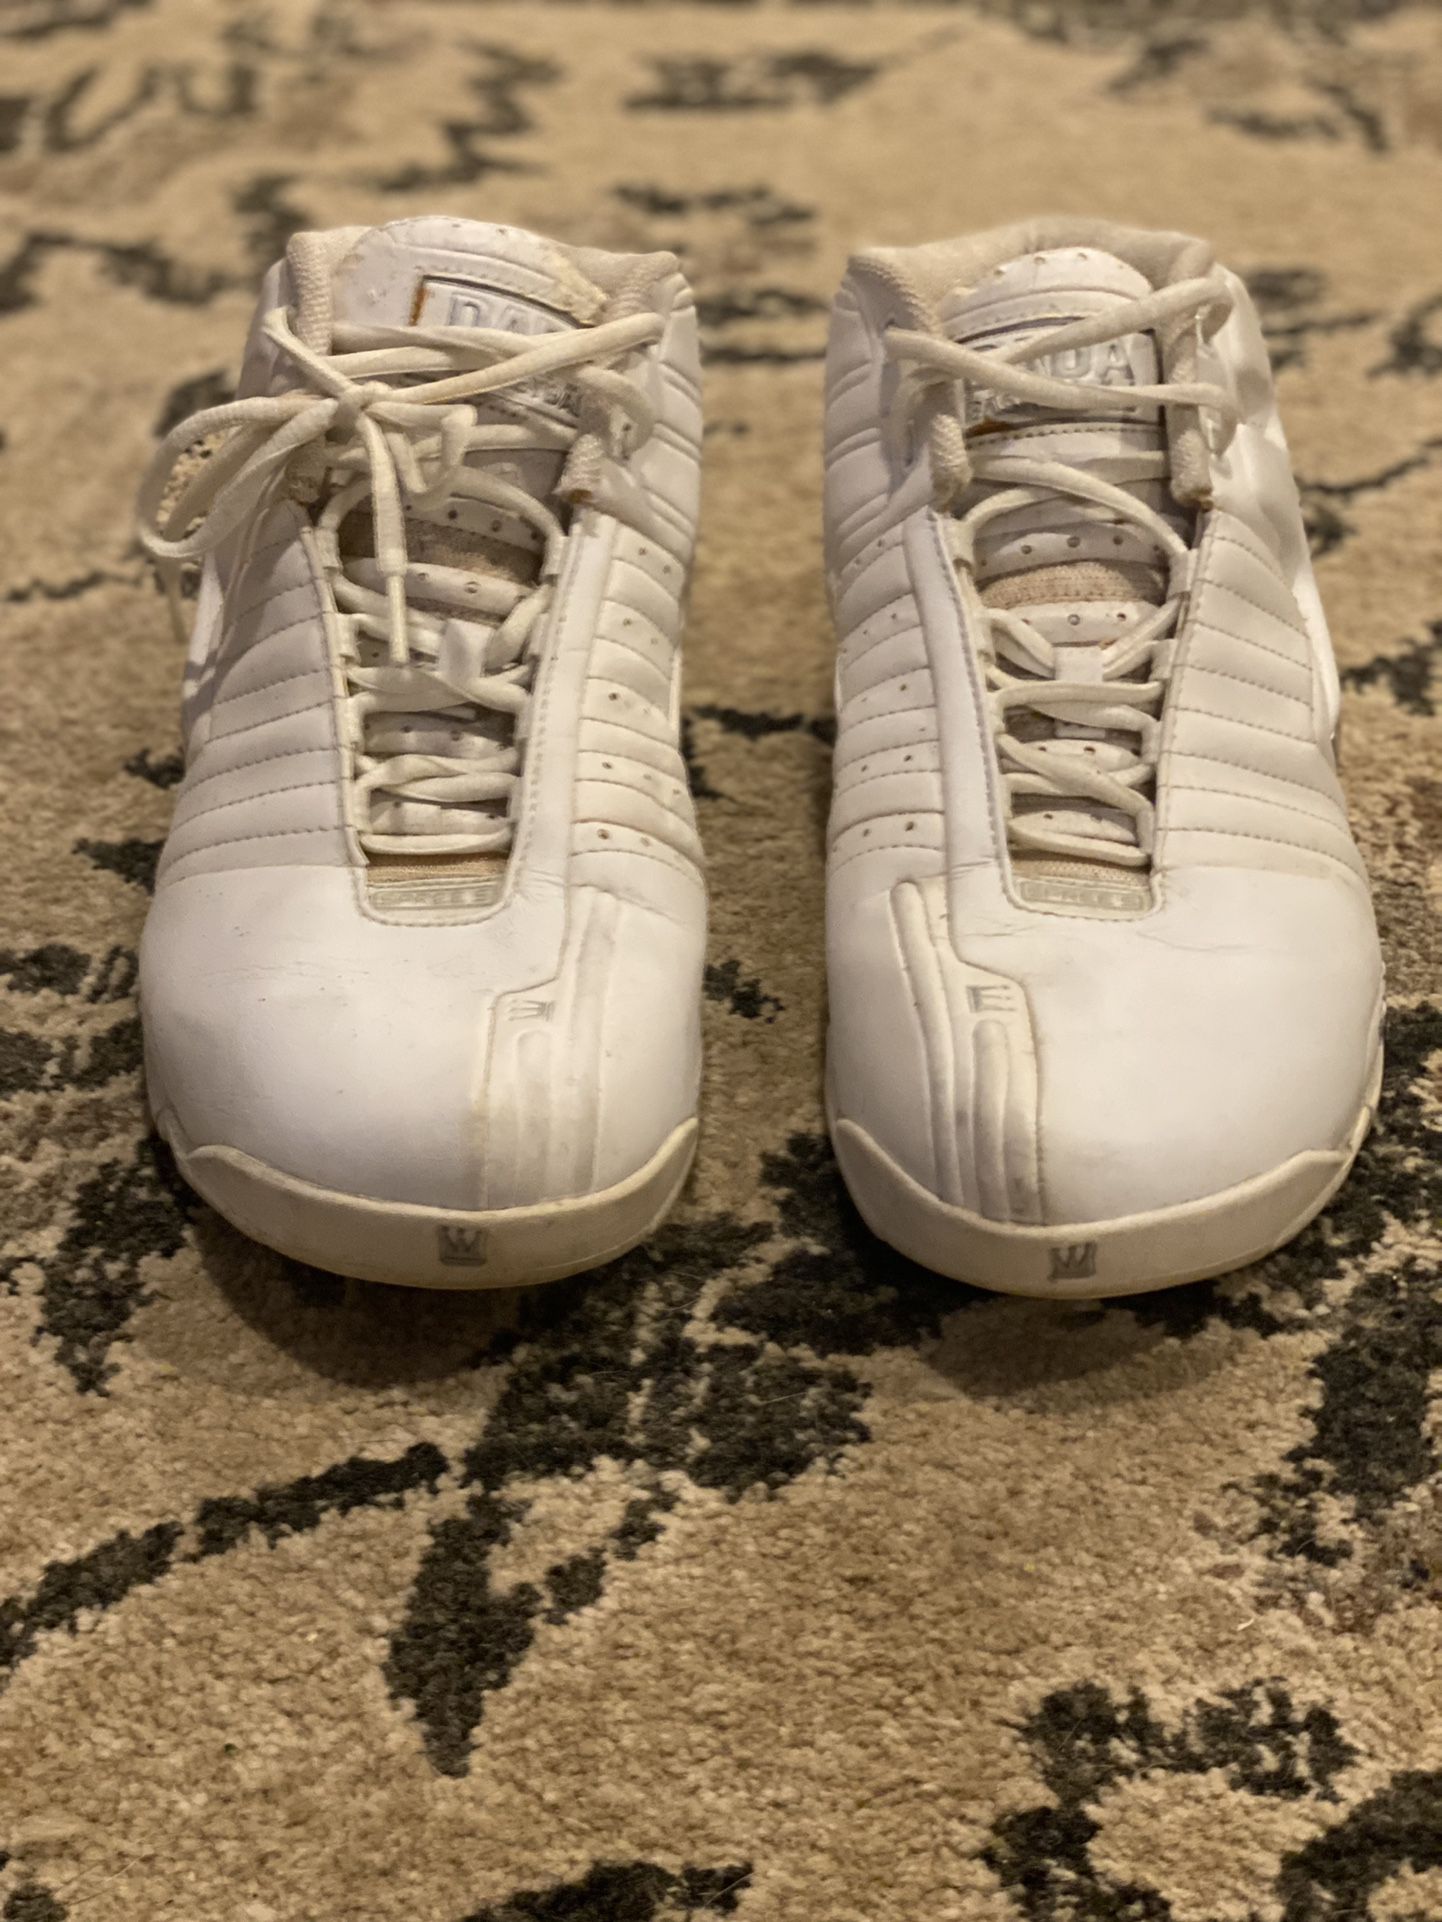 Latrell Sprewell signed shoes for Sale in Newark, CA - OfferUp